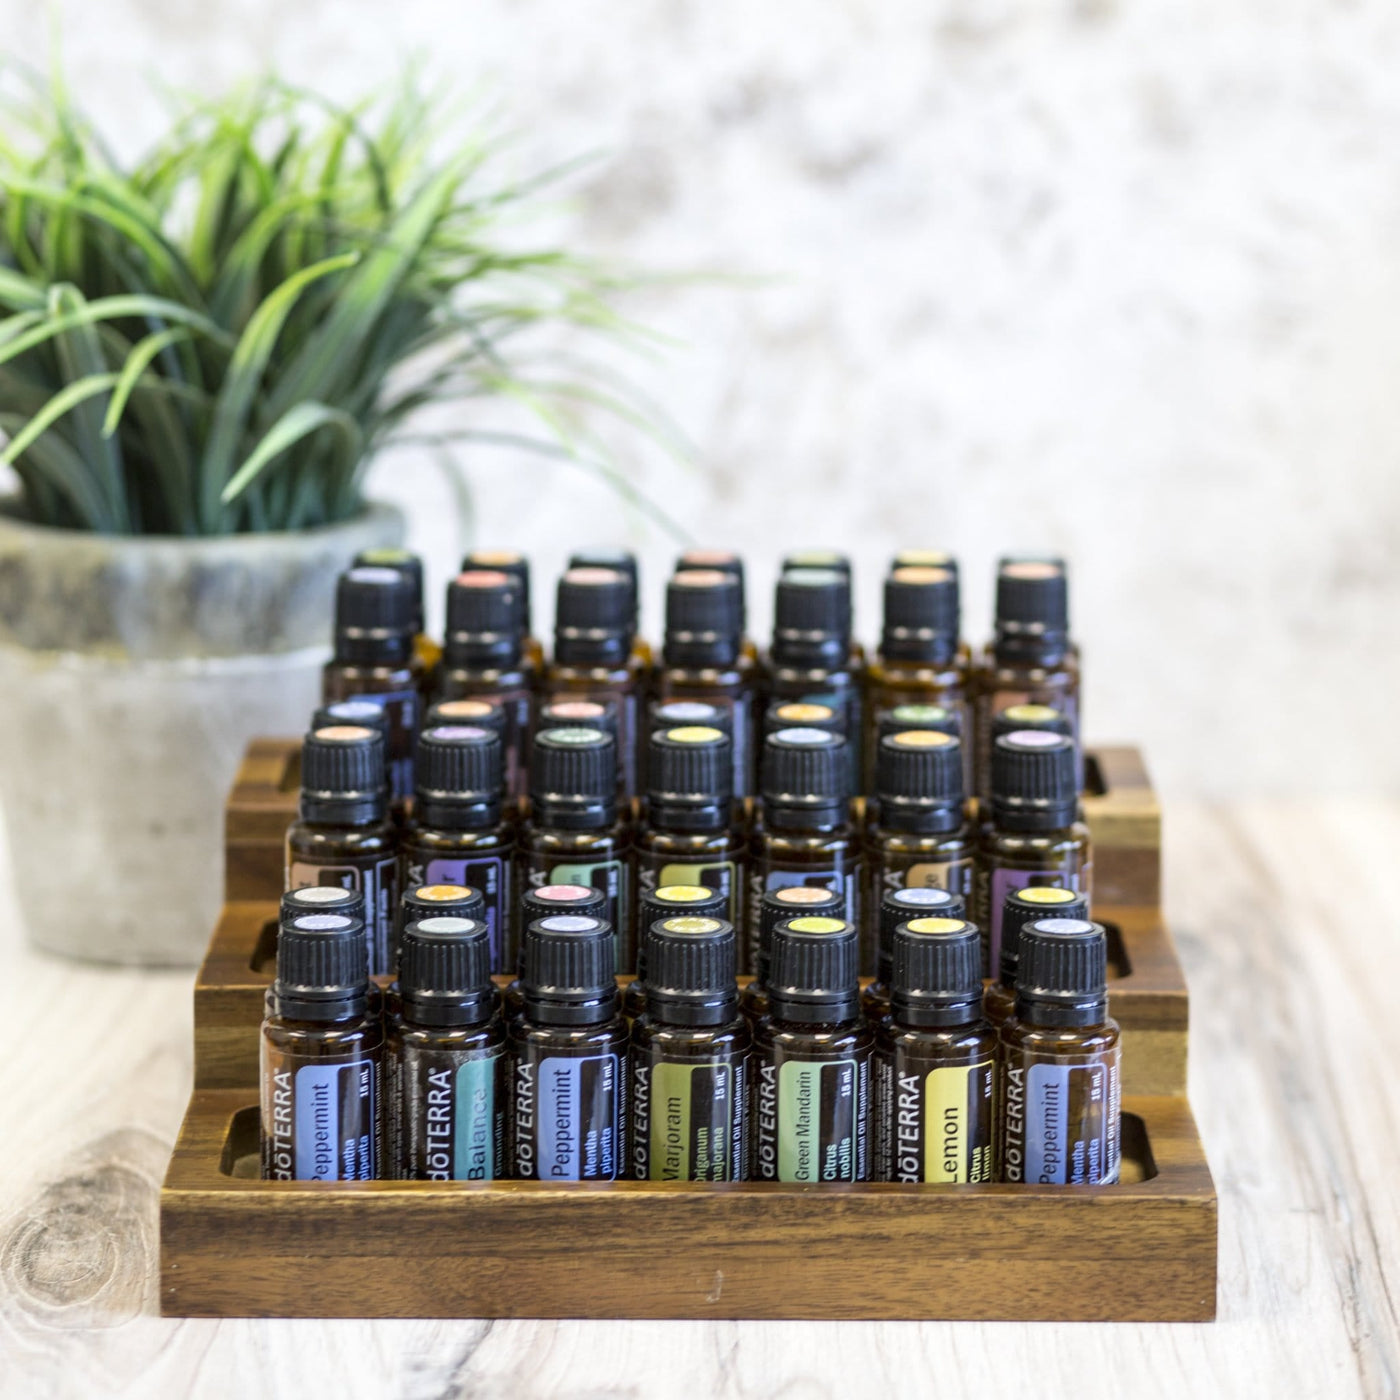 Essential Oil 3 Tier Display - Oil Life Canada - Canada's Best Essential Oil Supplies